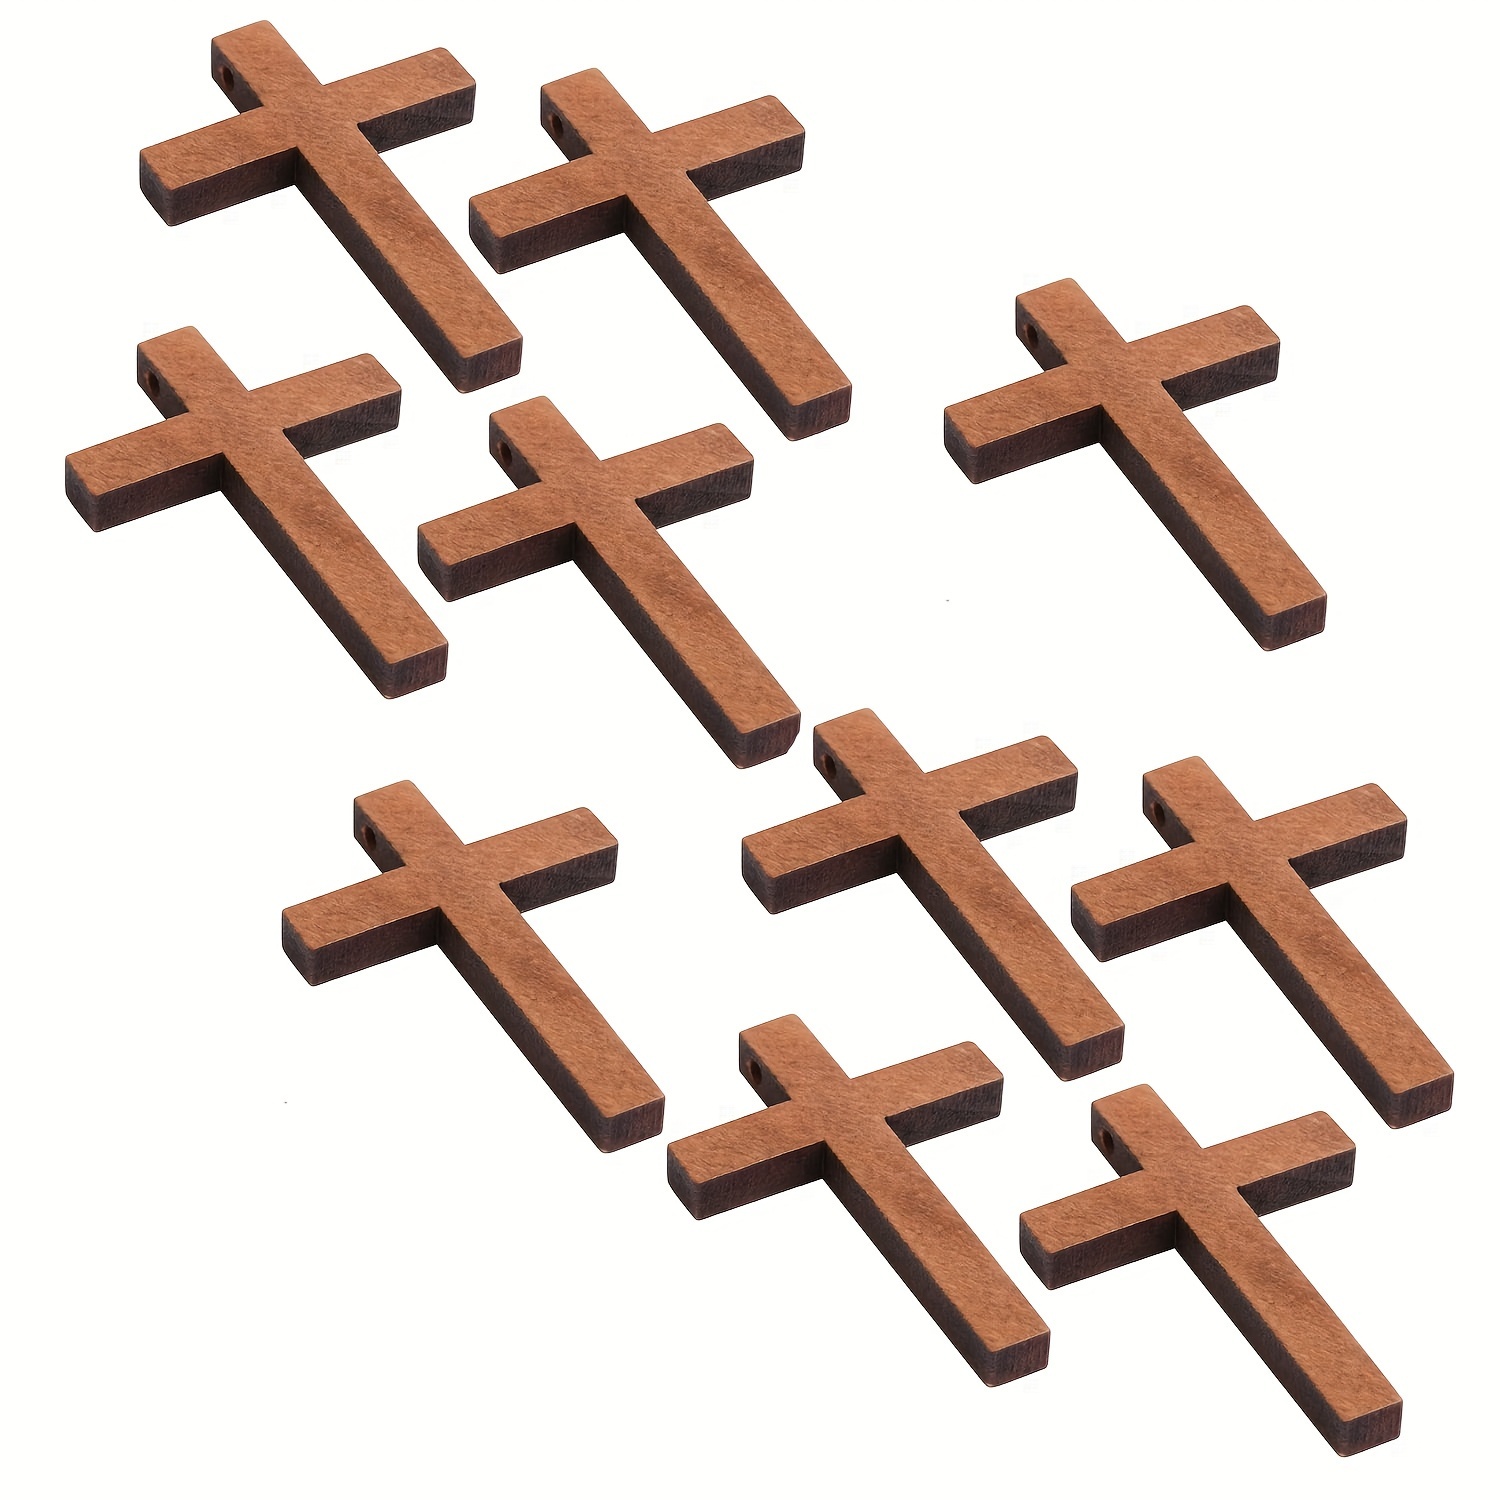 Wooden Crosses, Small Wooden Crosses, Wood Crosses For Crafts